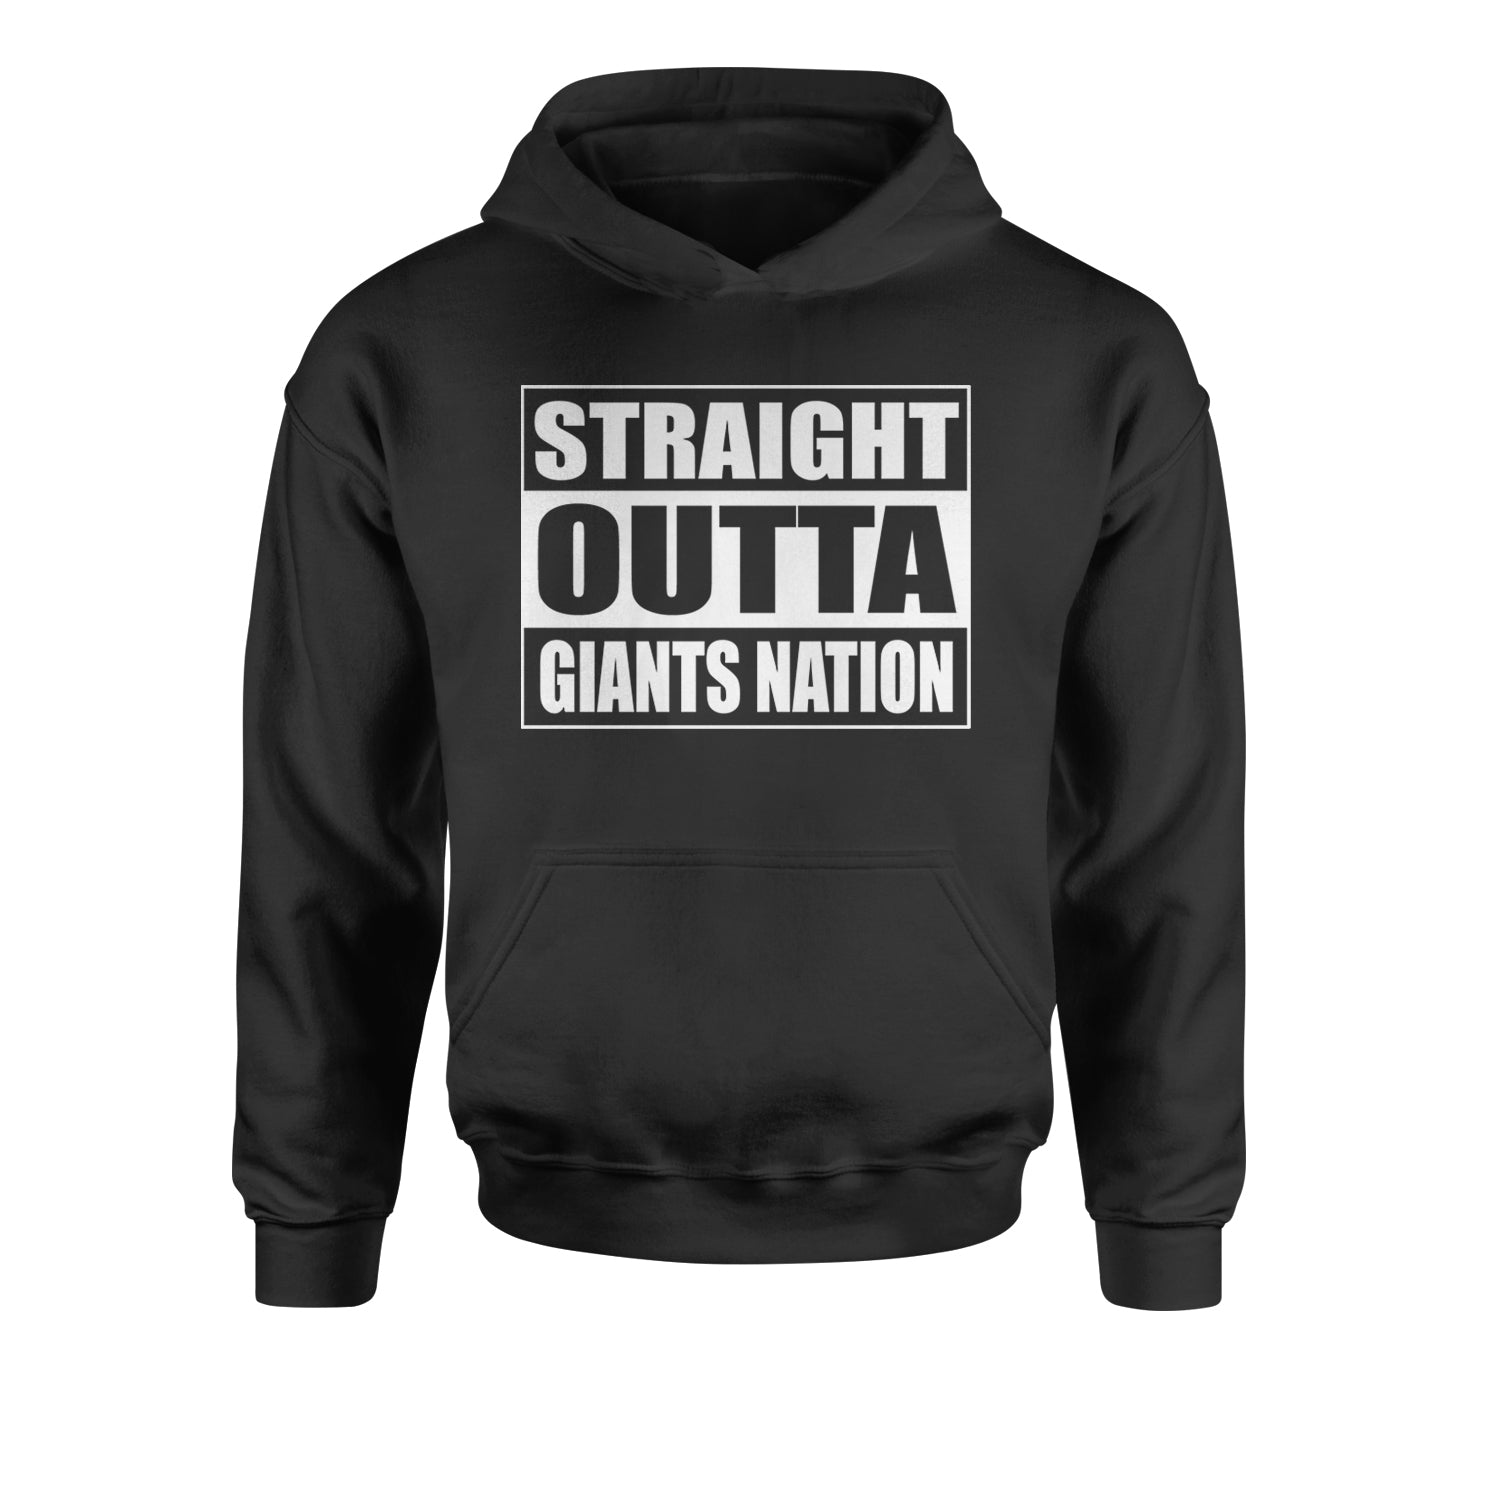 Straight Outta Giants Nation Youth-Sized Hoodie bleed, blue, football, giants, new, ny, york by Expression Tees